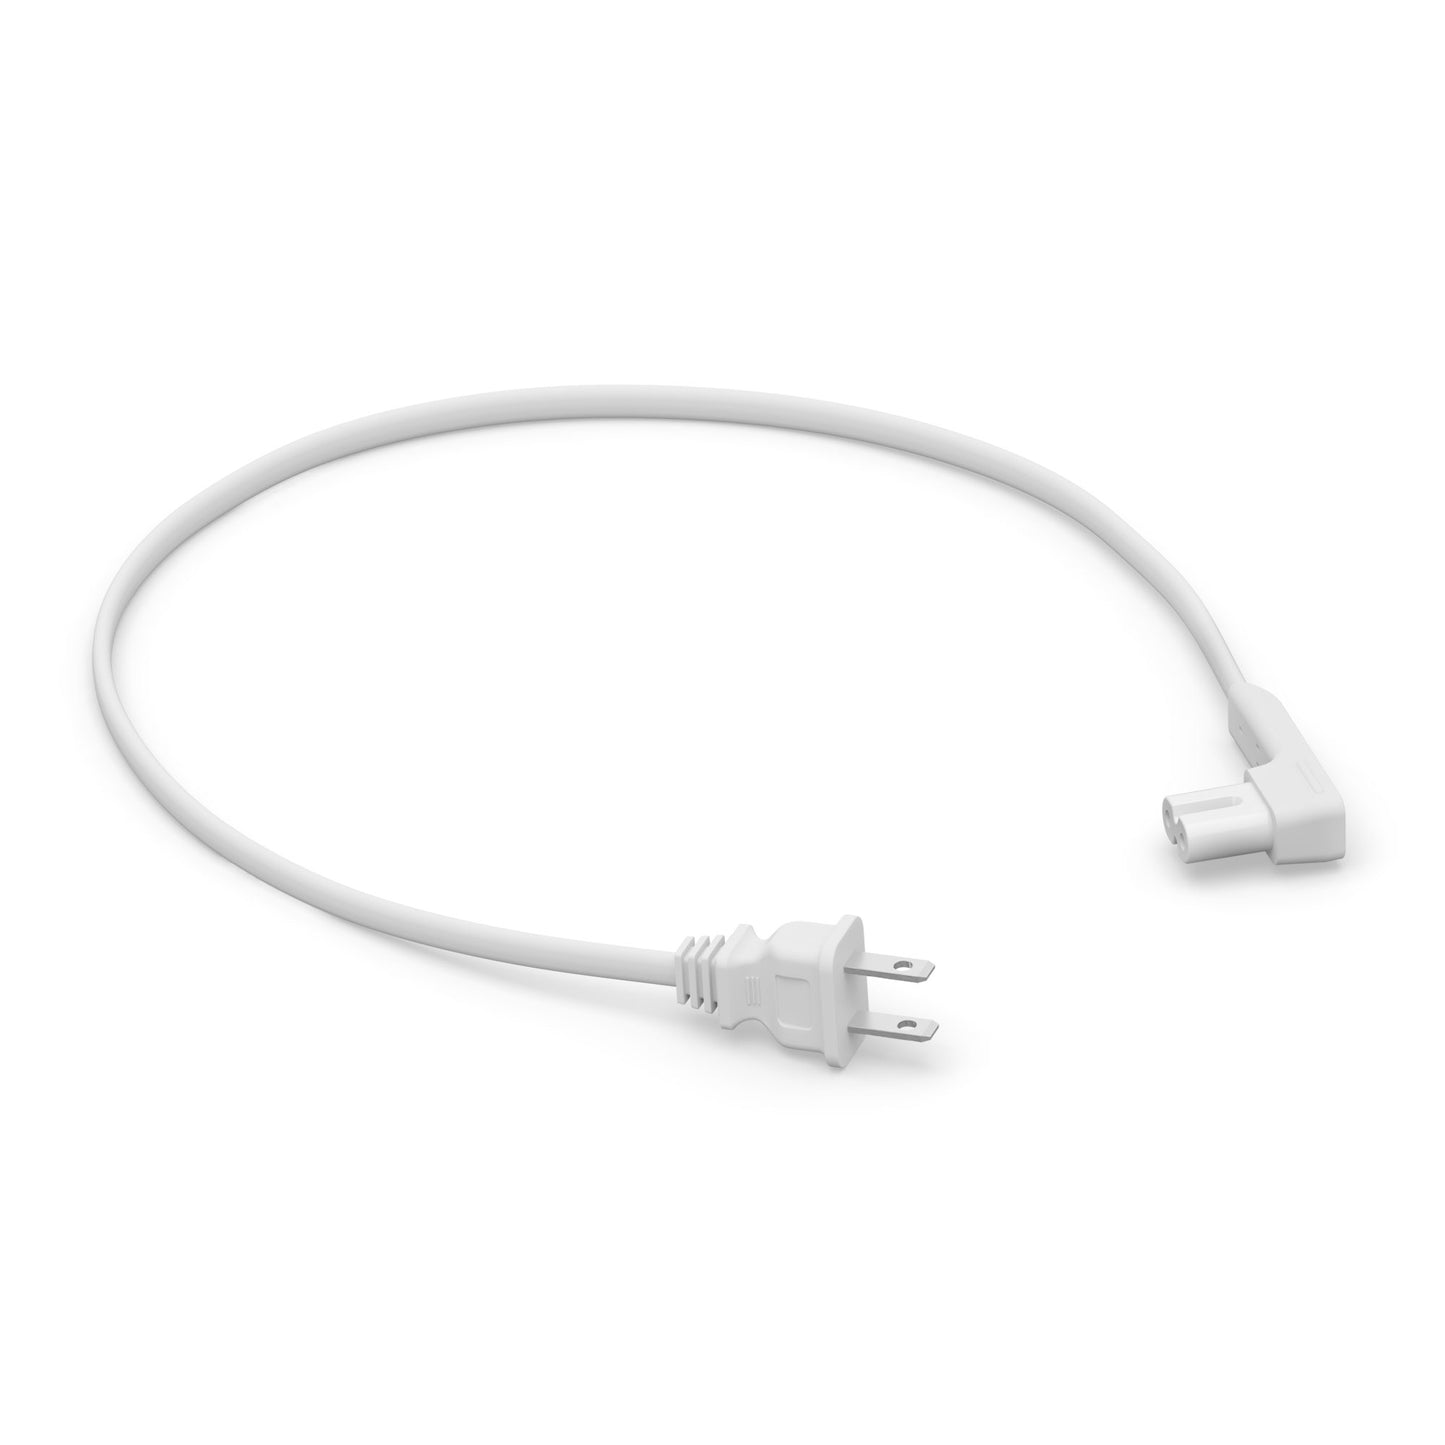 Sonos Power Cable (White) - Top View